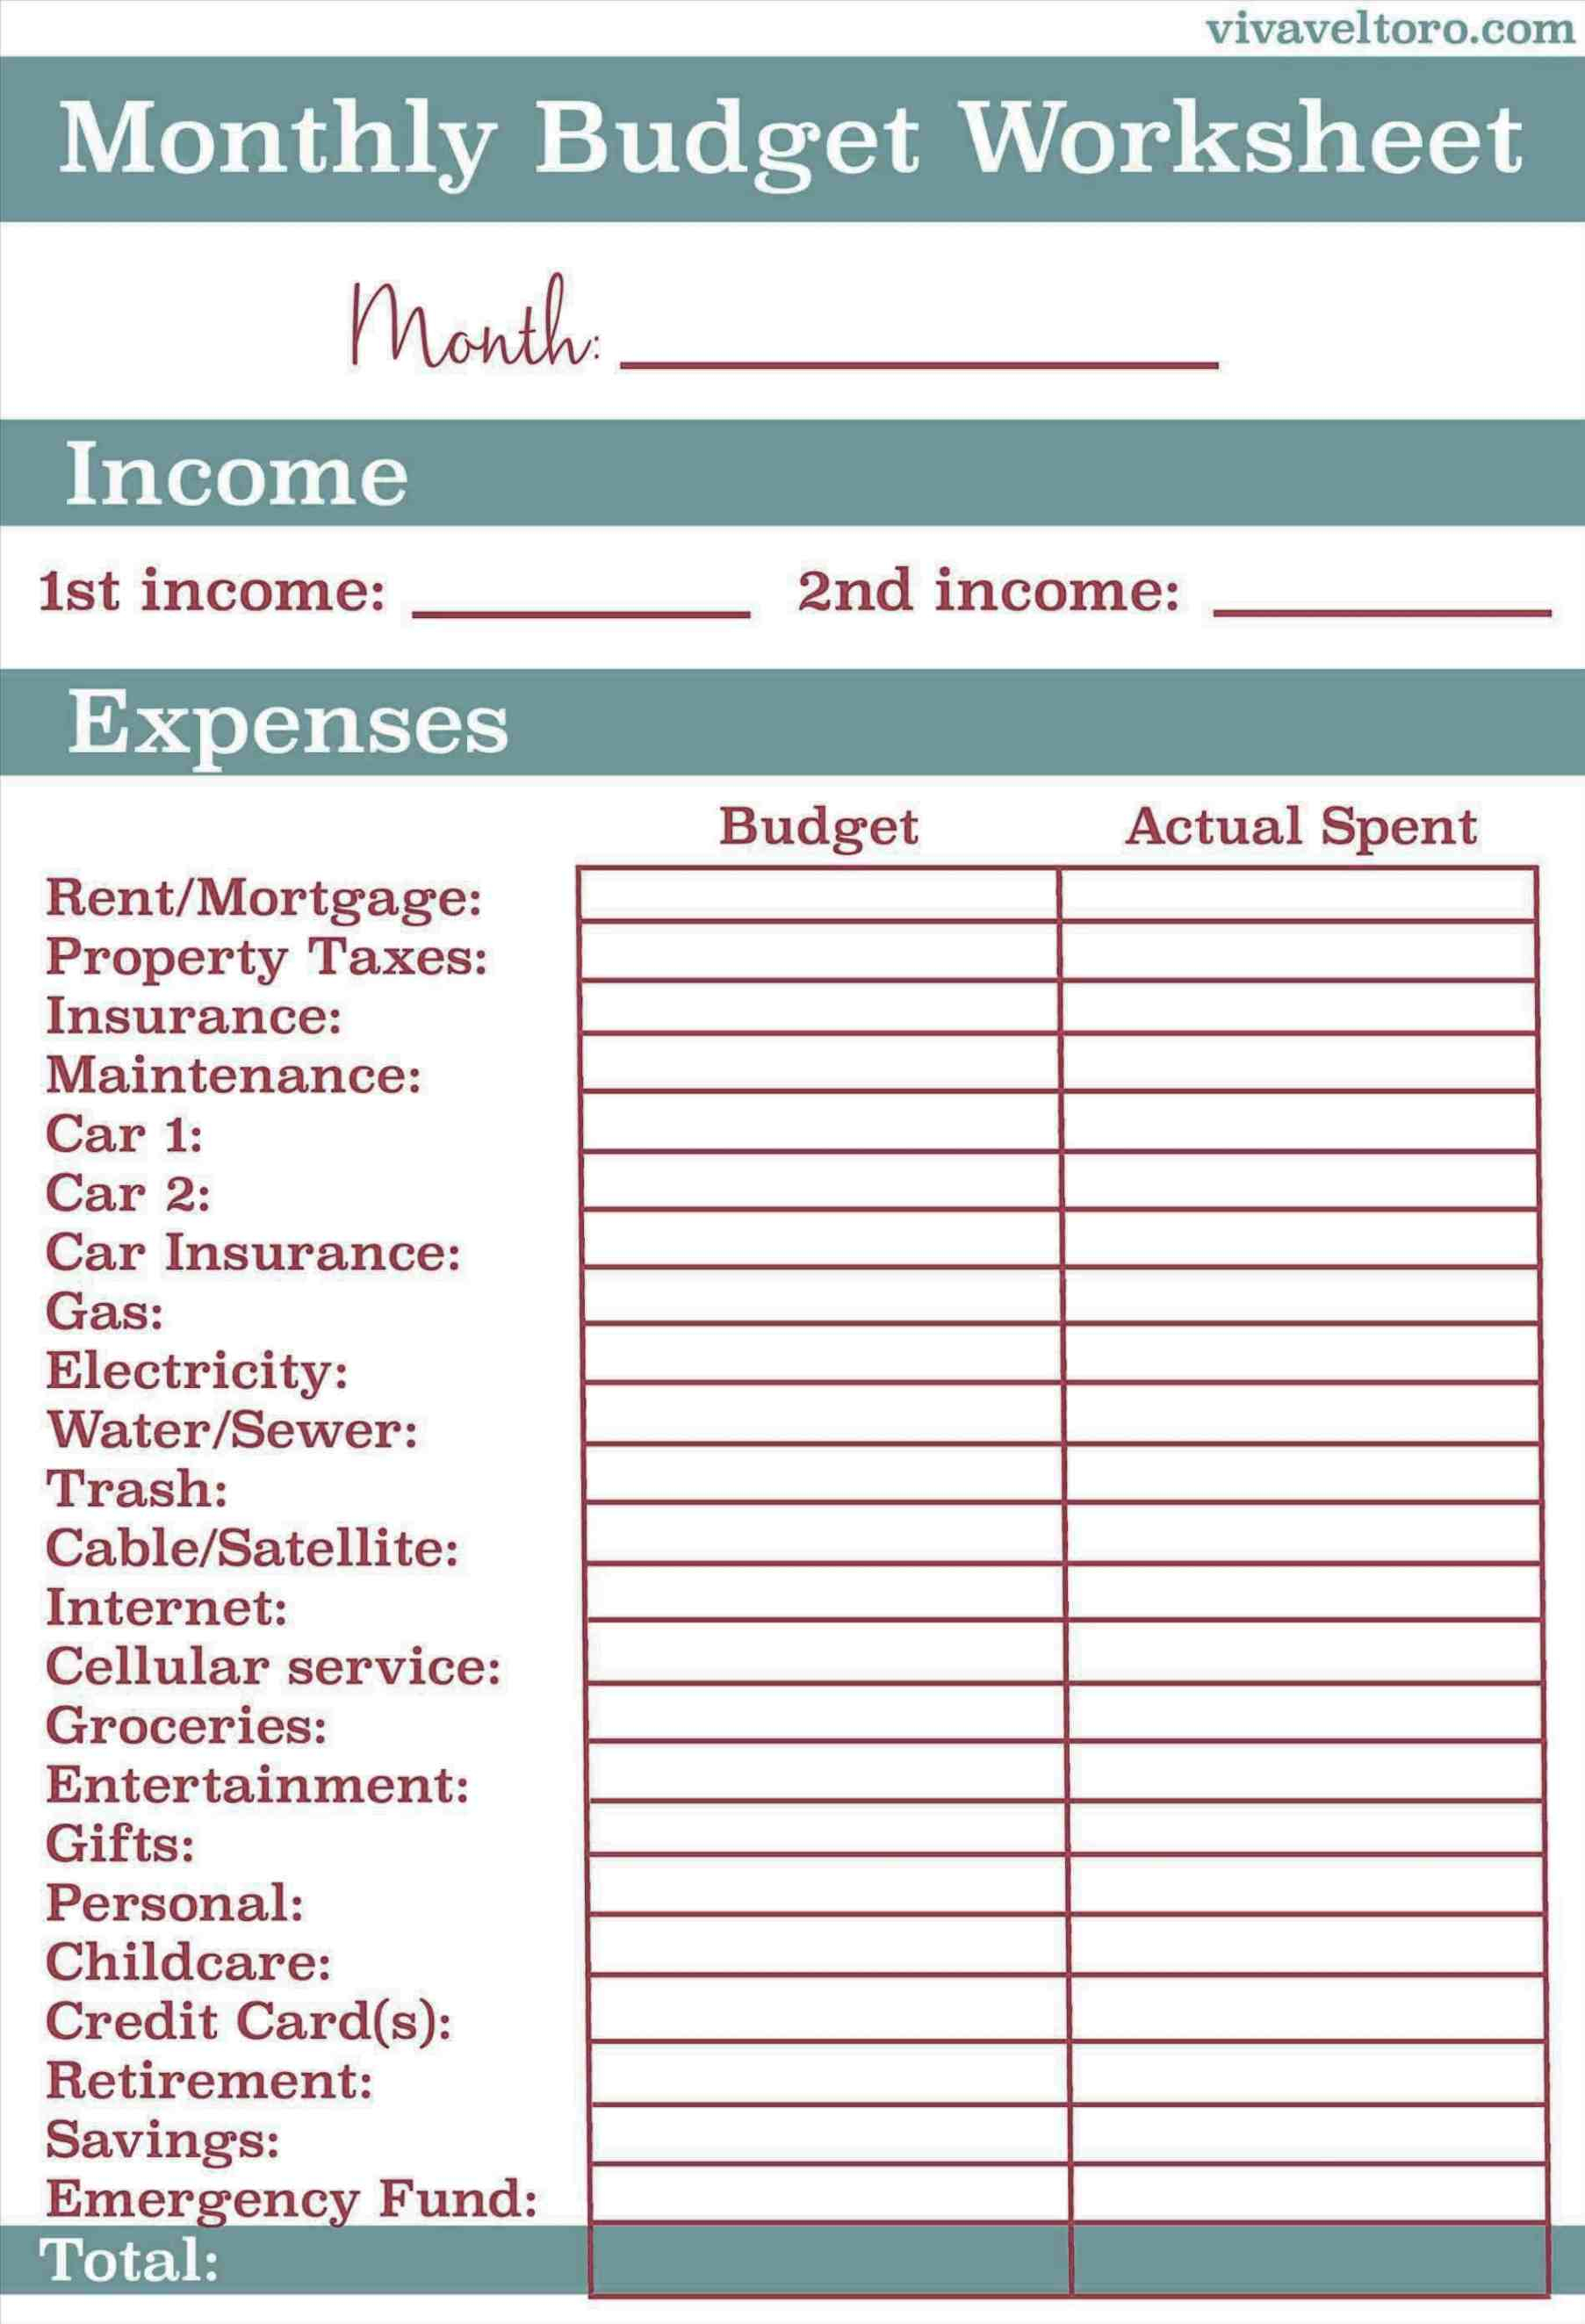 College Expenses Spreadsheet Intended For College Budget Worksheet Dave Ramseyvely Debt Template Monthly